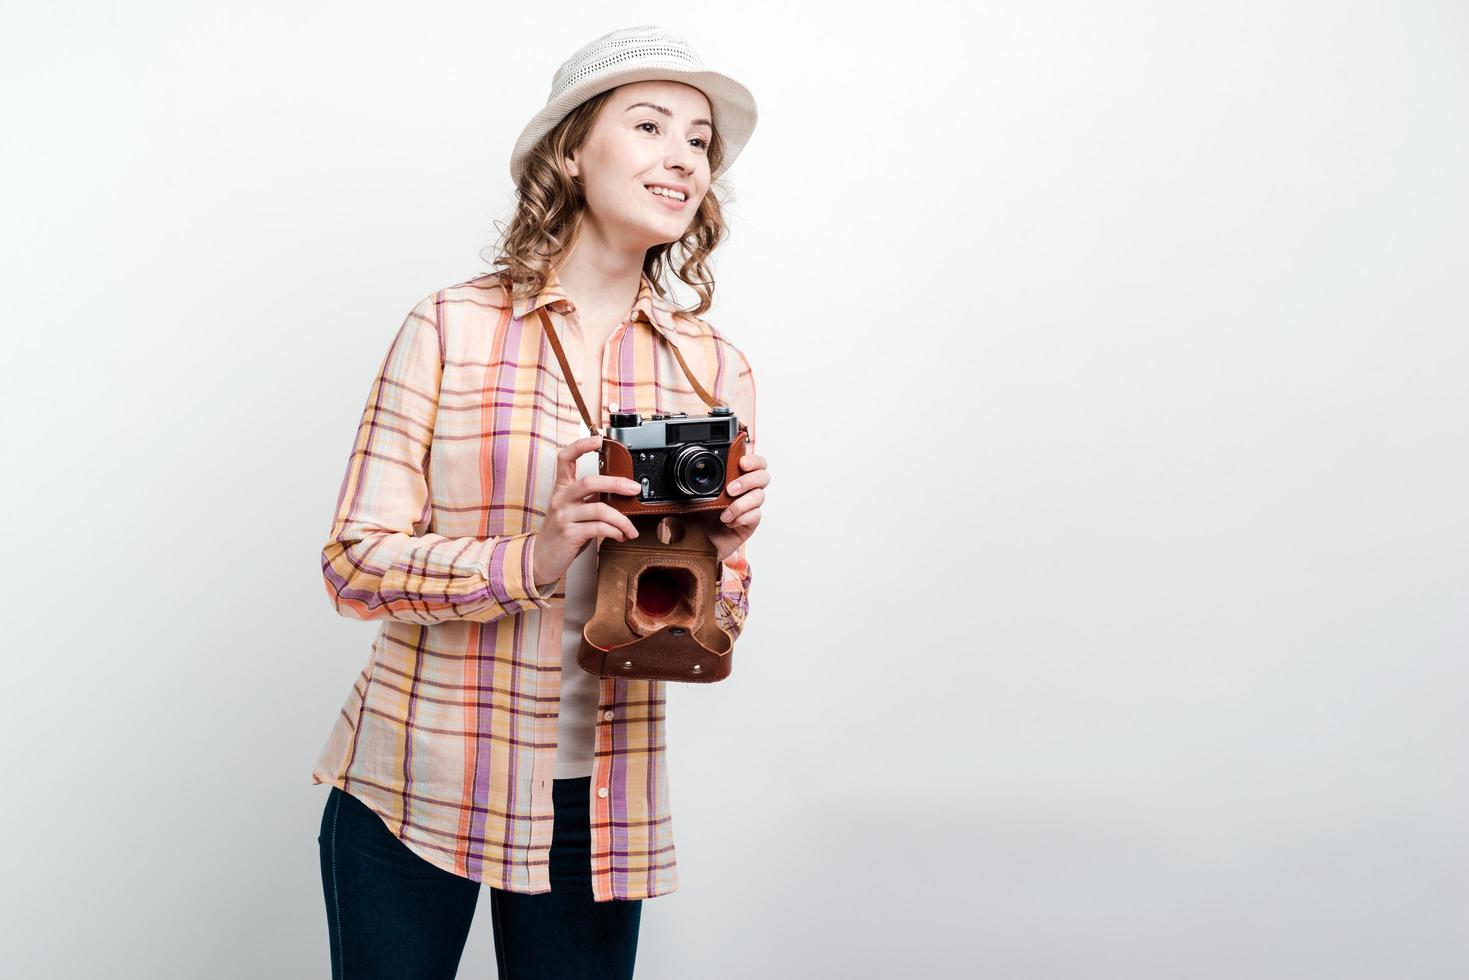 Girl with retro camera and wearing hat looks away on white wall background photo